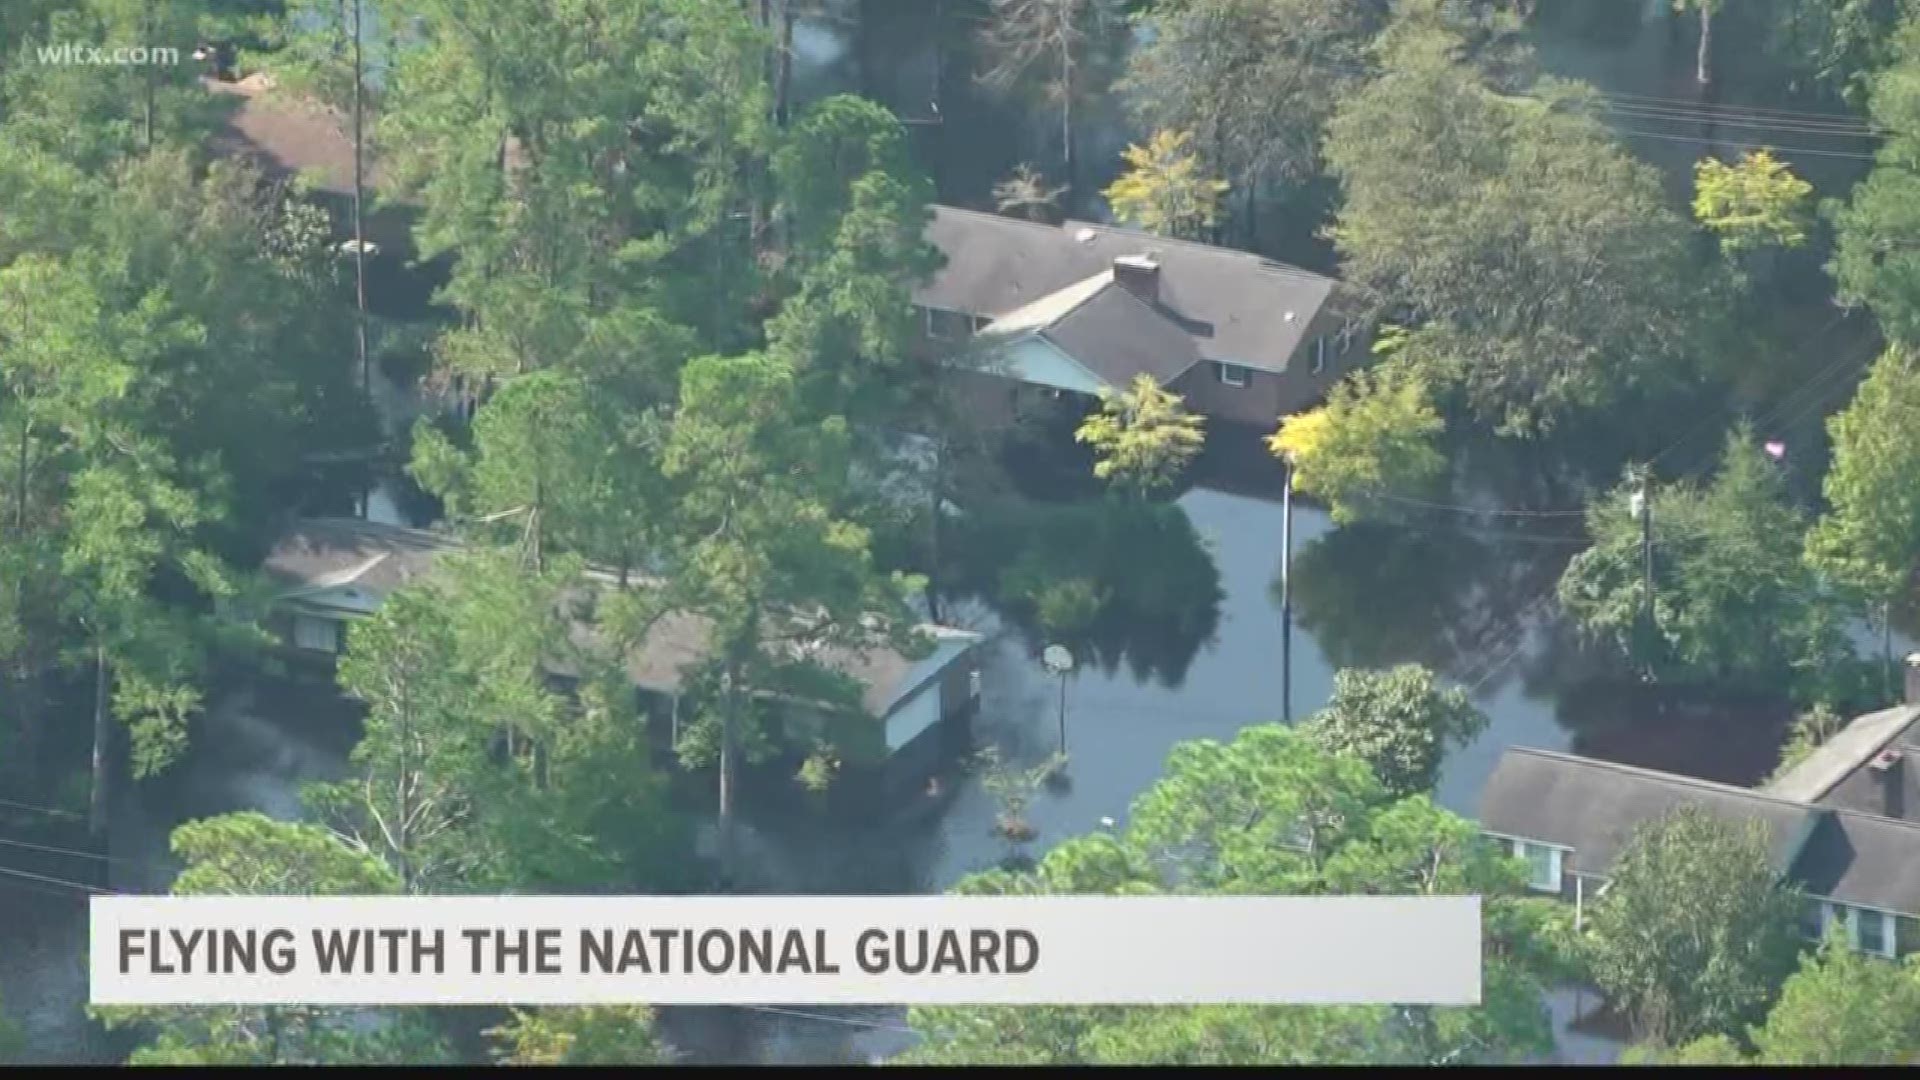 News 19 got the chance to fly with the National Guard to get a bird's eye view of the flooding that's impacting many parts of South Carolina.